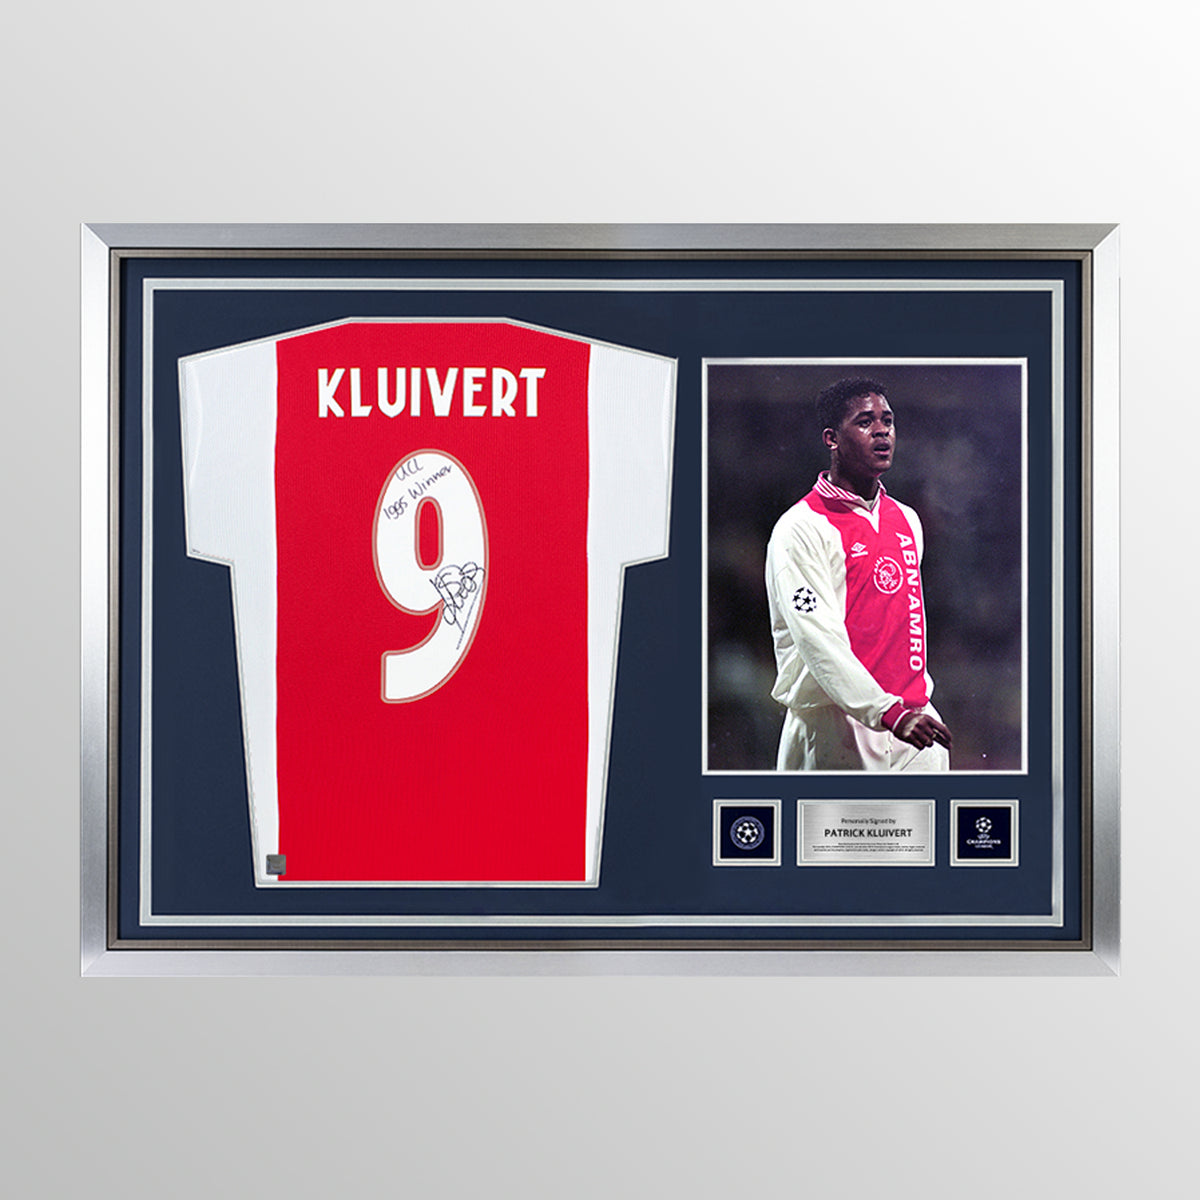 Patrick Kluivert Official UEFA Champions League Back Signed and Hero Framed Modern AFC Ajax Home Shirt: 1995 UEFA Champions League Winner Edition UEFA Club Competitions Online Store